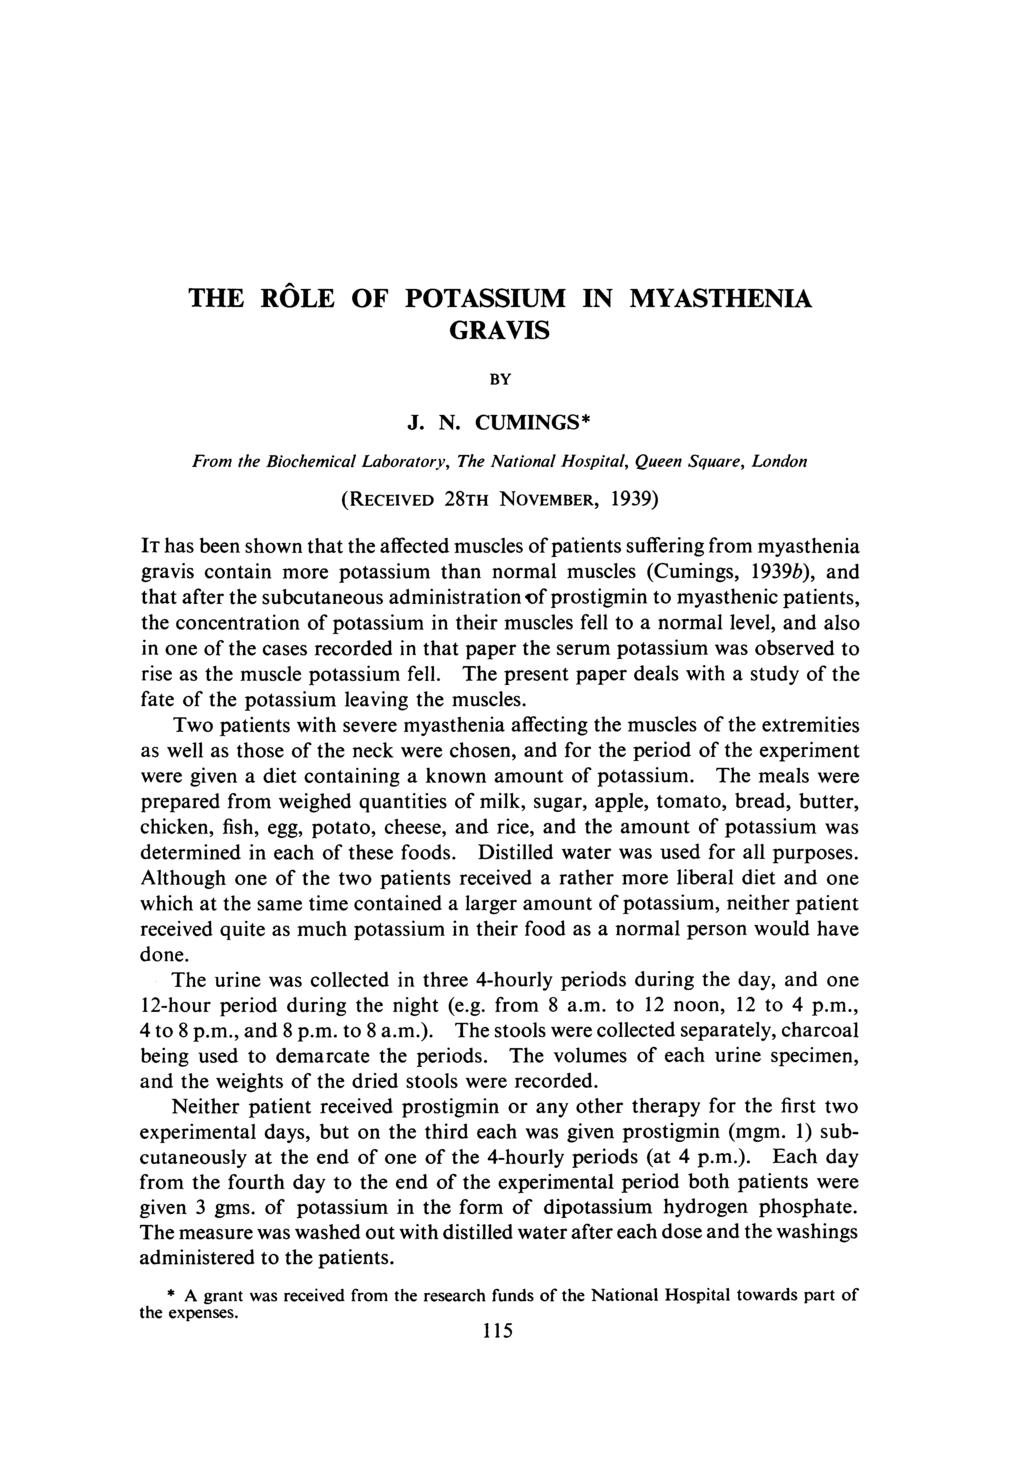 THE ROLE OF POTASSIUM IN MYASTHENIA GRAVIS BY J. N.